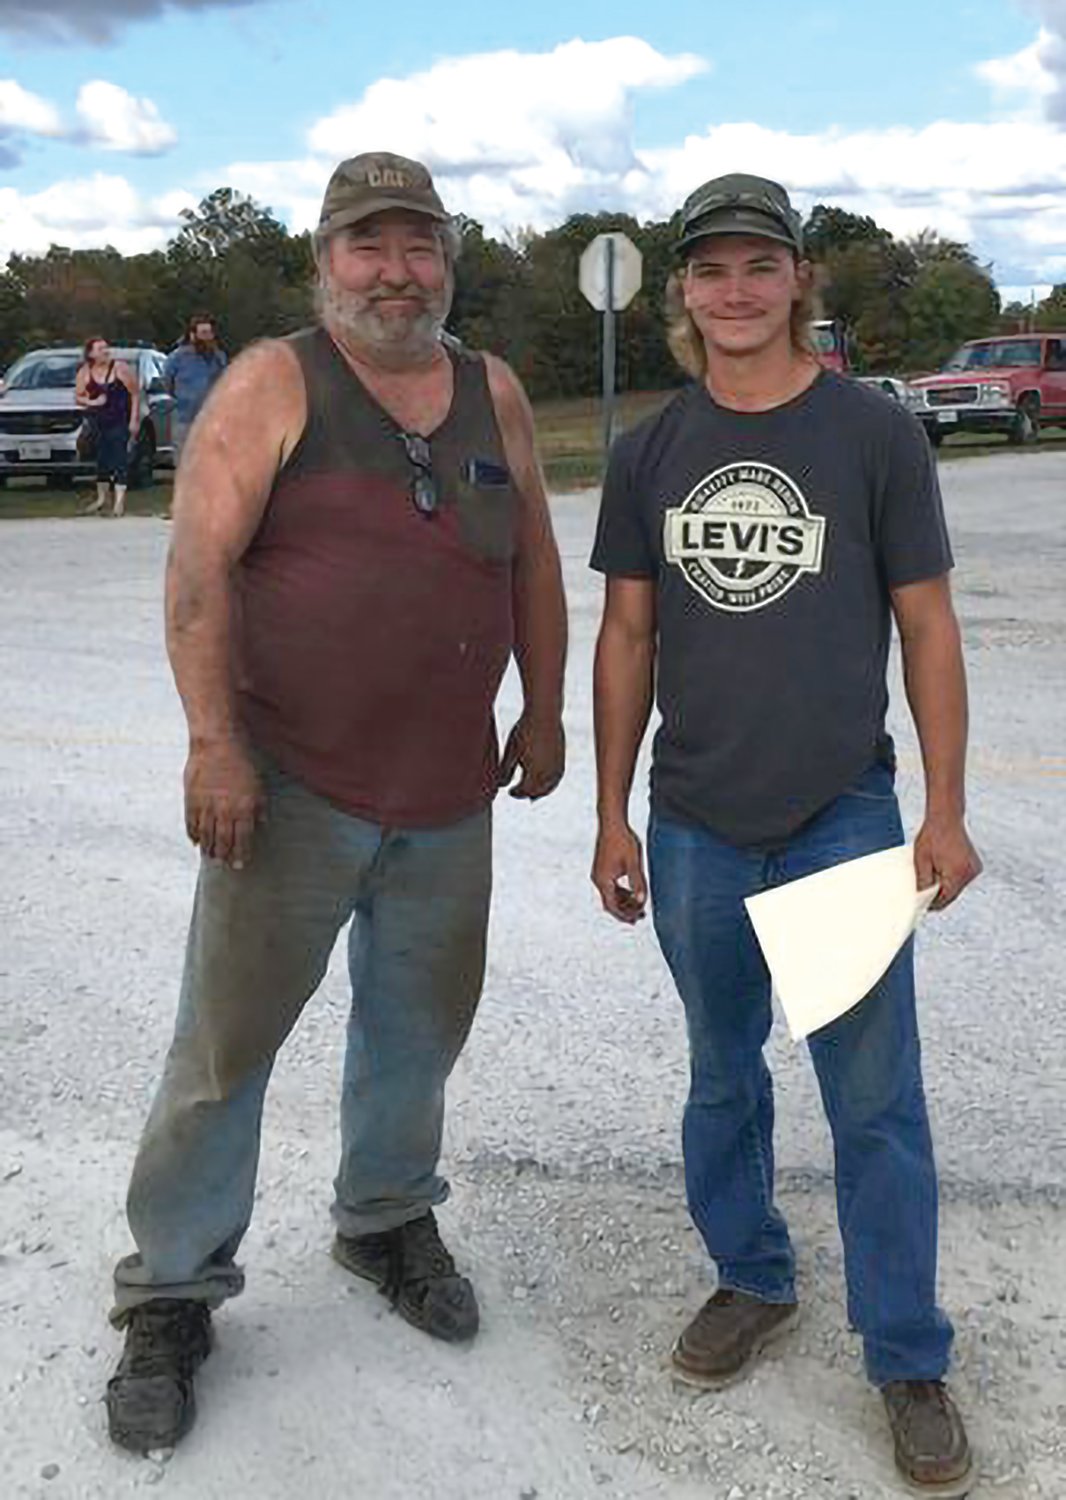 Burnout winners were Dalton Borders, Mansfield, who took first place, on right, with Raymond Wilson, Seymour, second place.